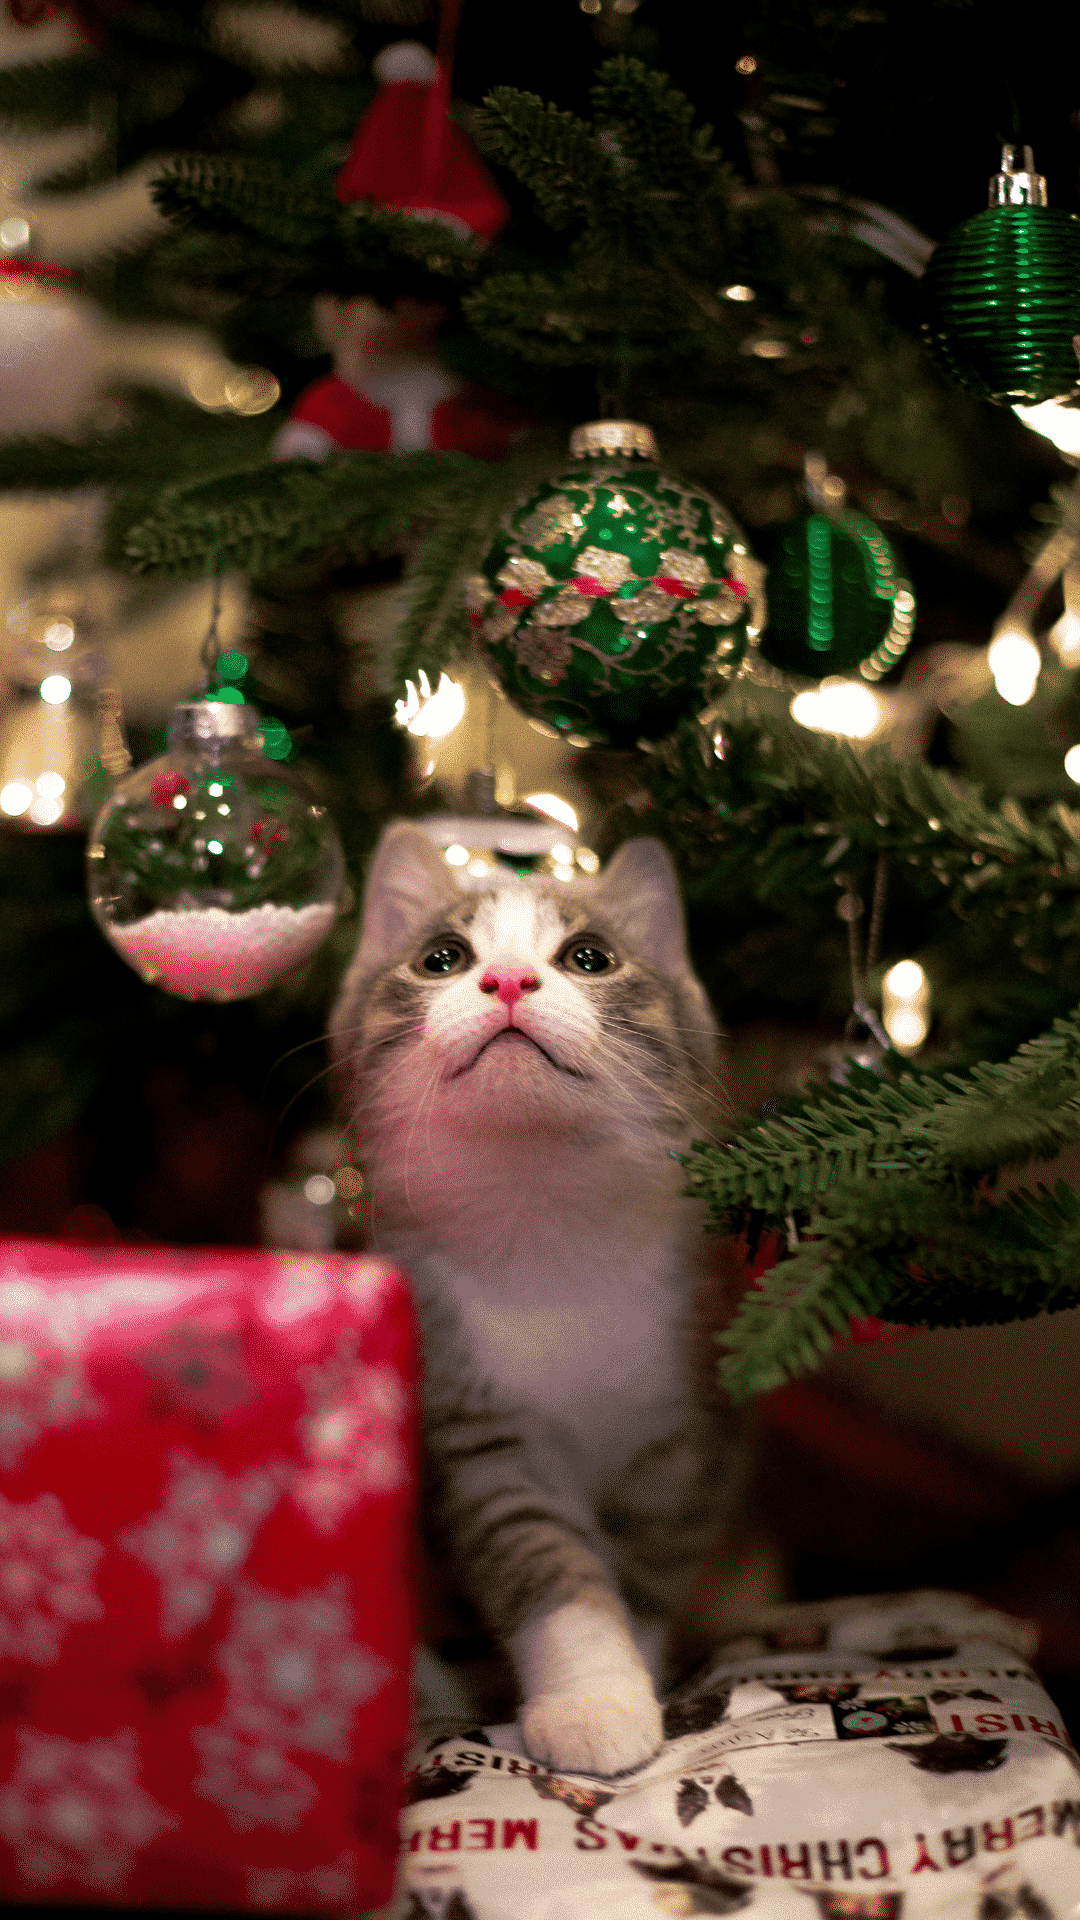 A cat sitting under a Christmas tree with presents. - Cute Christmas